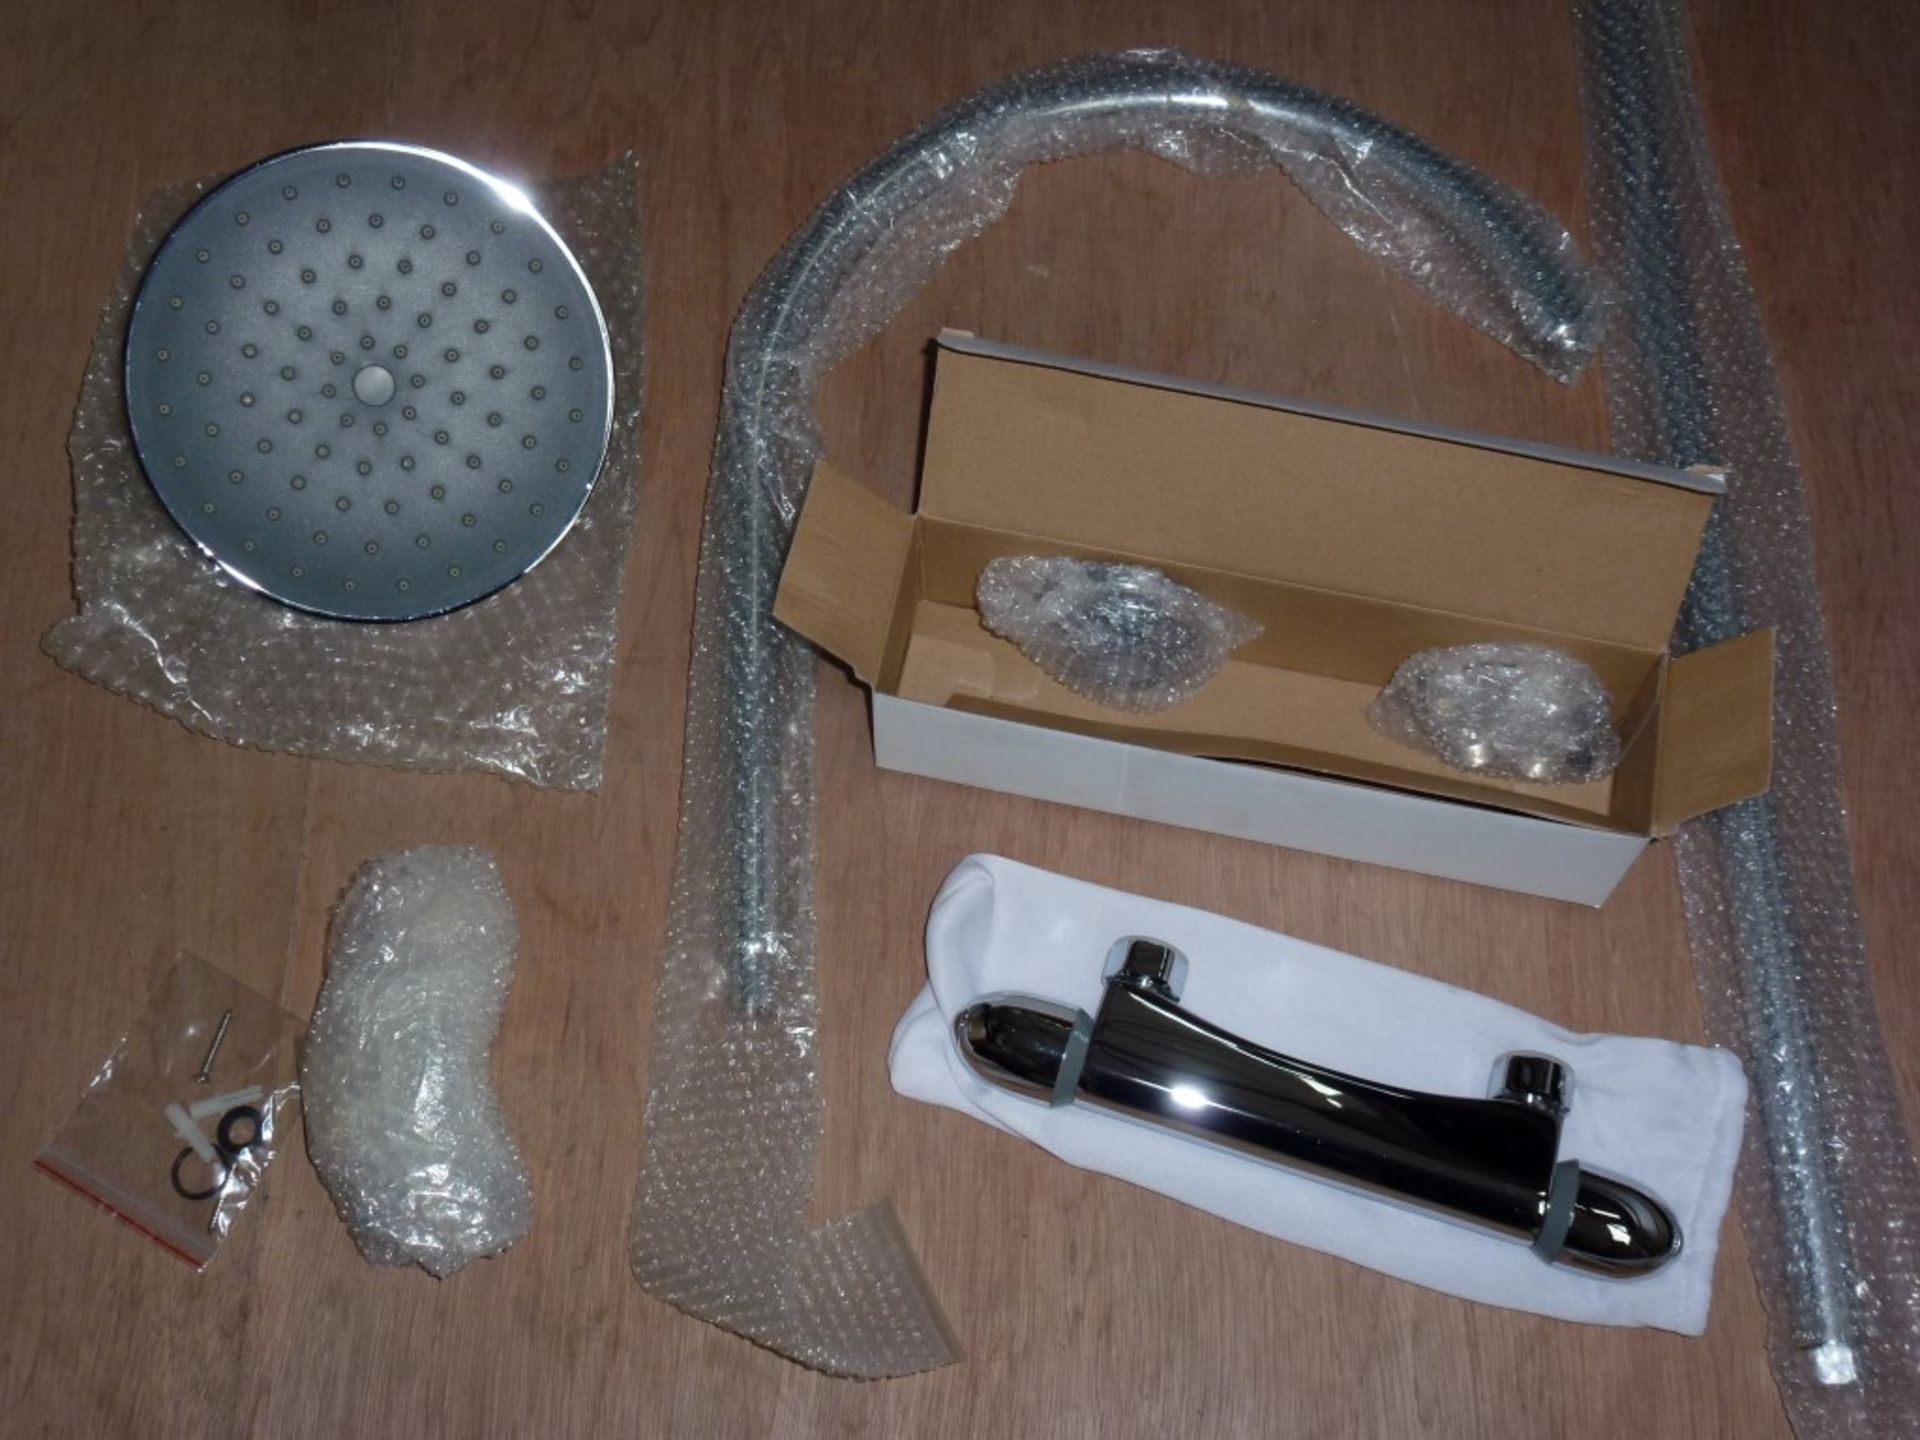 1 x Thermostatic Bar Valve Shower Kit - Includes Thermostatic Shower Valve, Shower Head and Rail Kit - Image 2 of 10